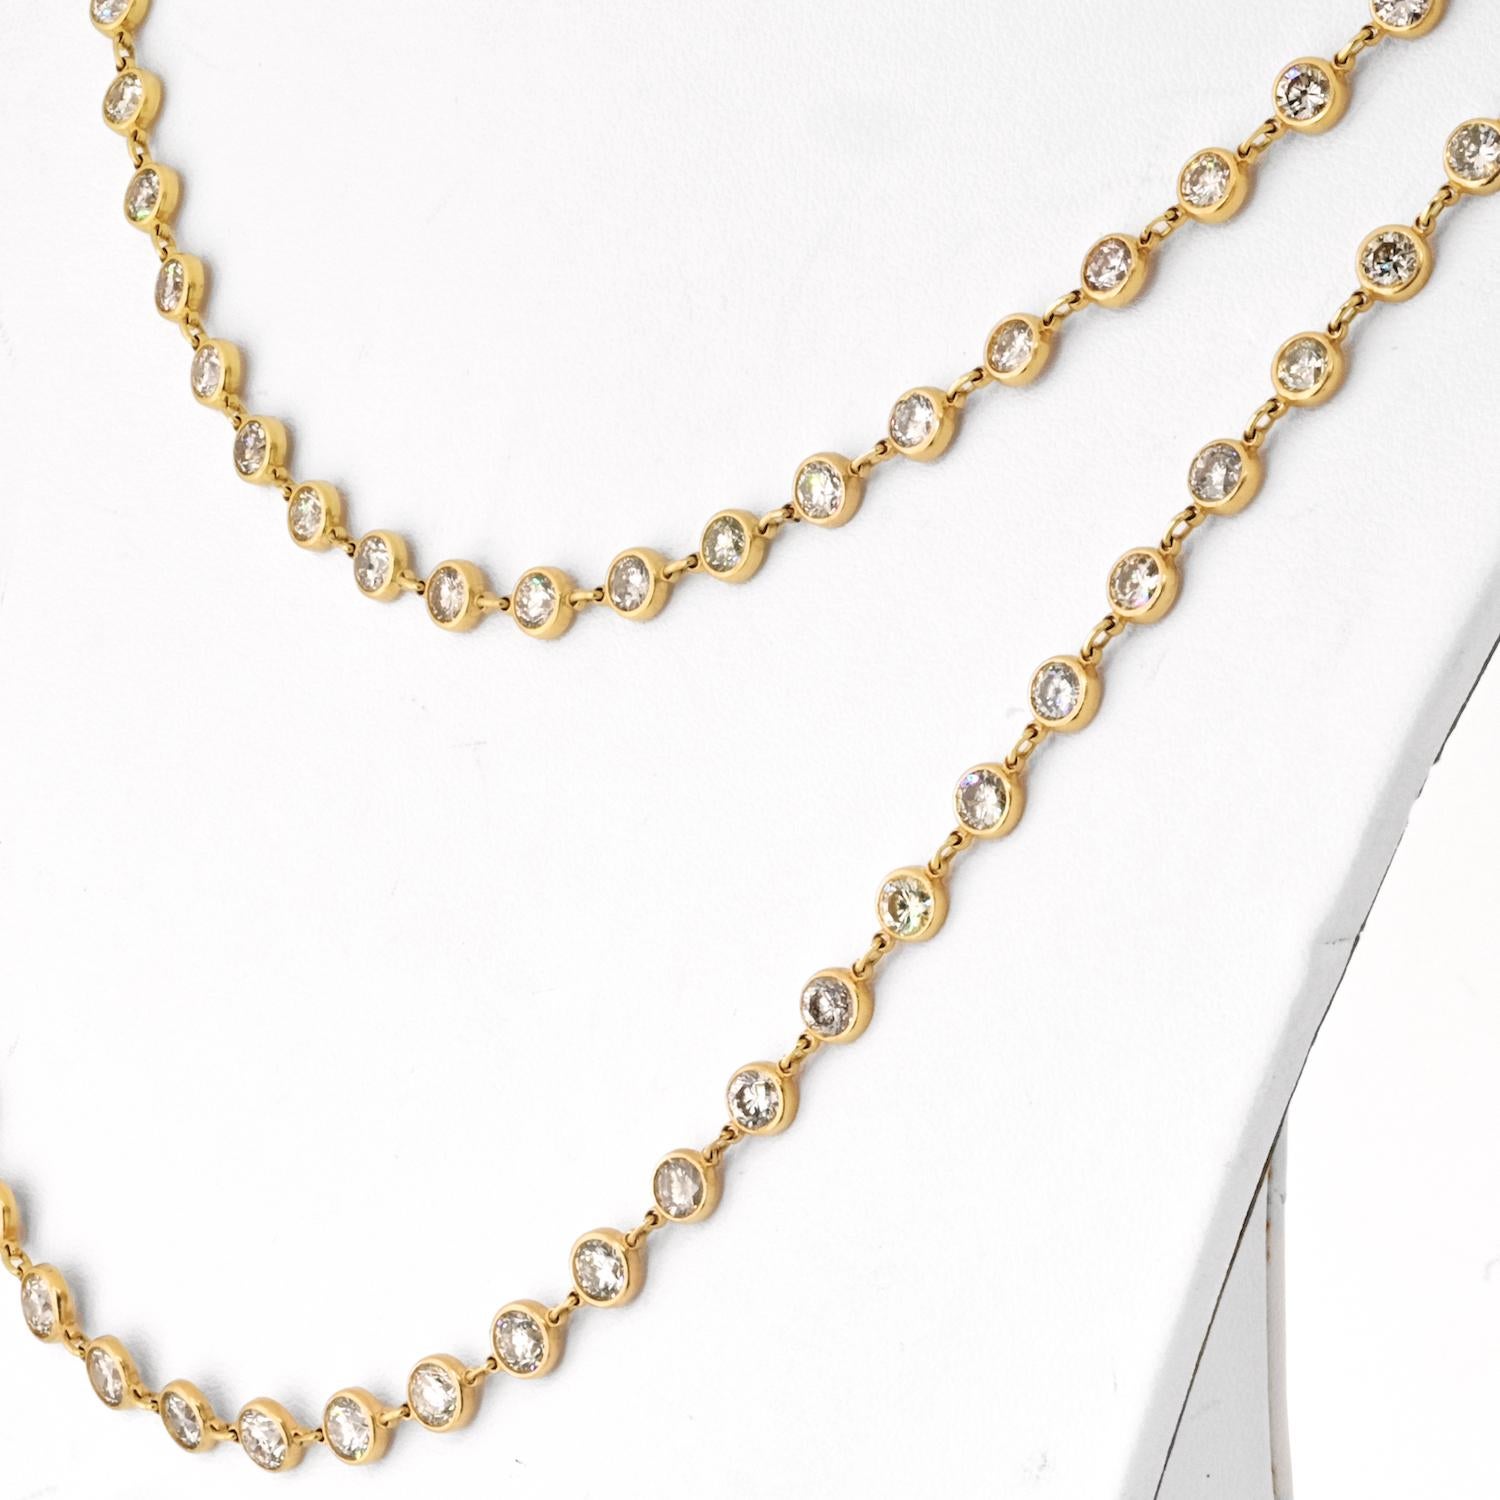 34 cttw 18K Yellow Gold Round Diamond By The Yard 43 Inches Chain Necklace In Excellent Condition For Sale In New York, NY